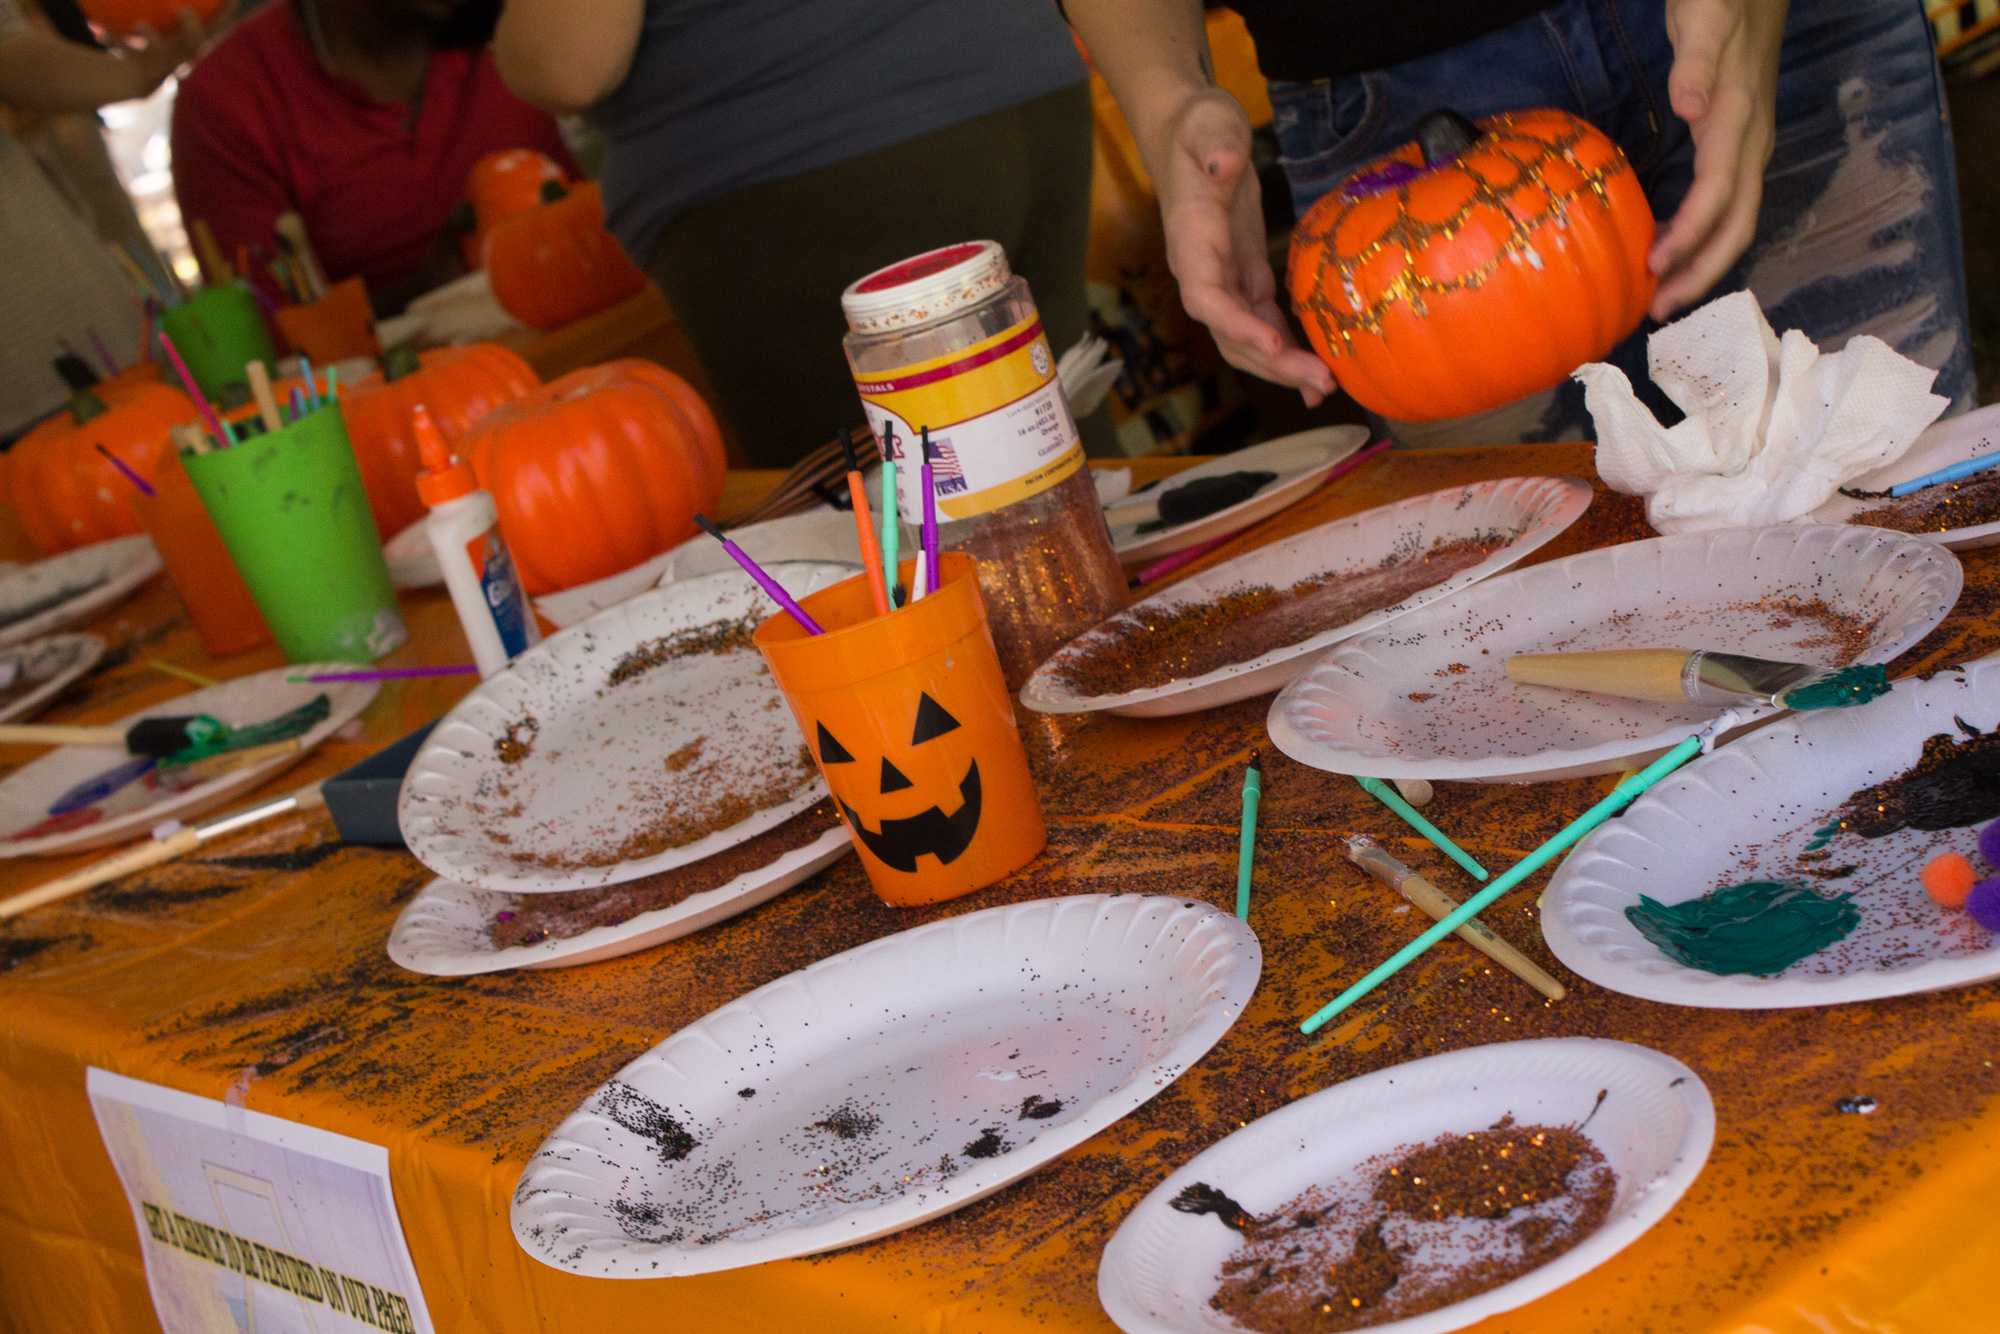 Pumpkin decorating table at Mountaineer Spirit Day, held on Oct. 19.